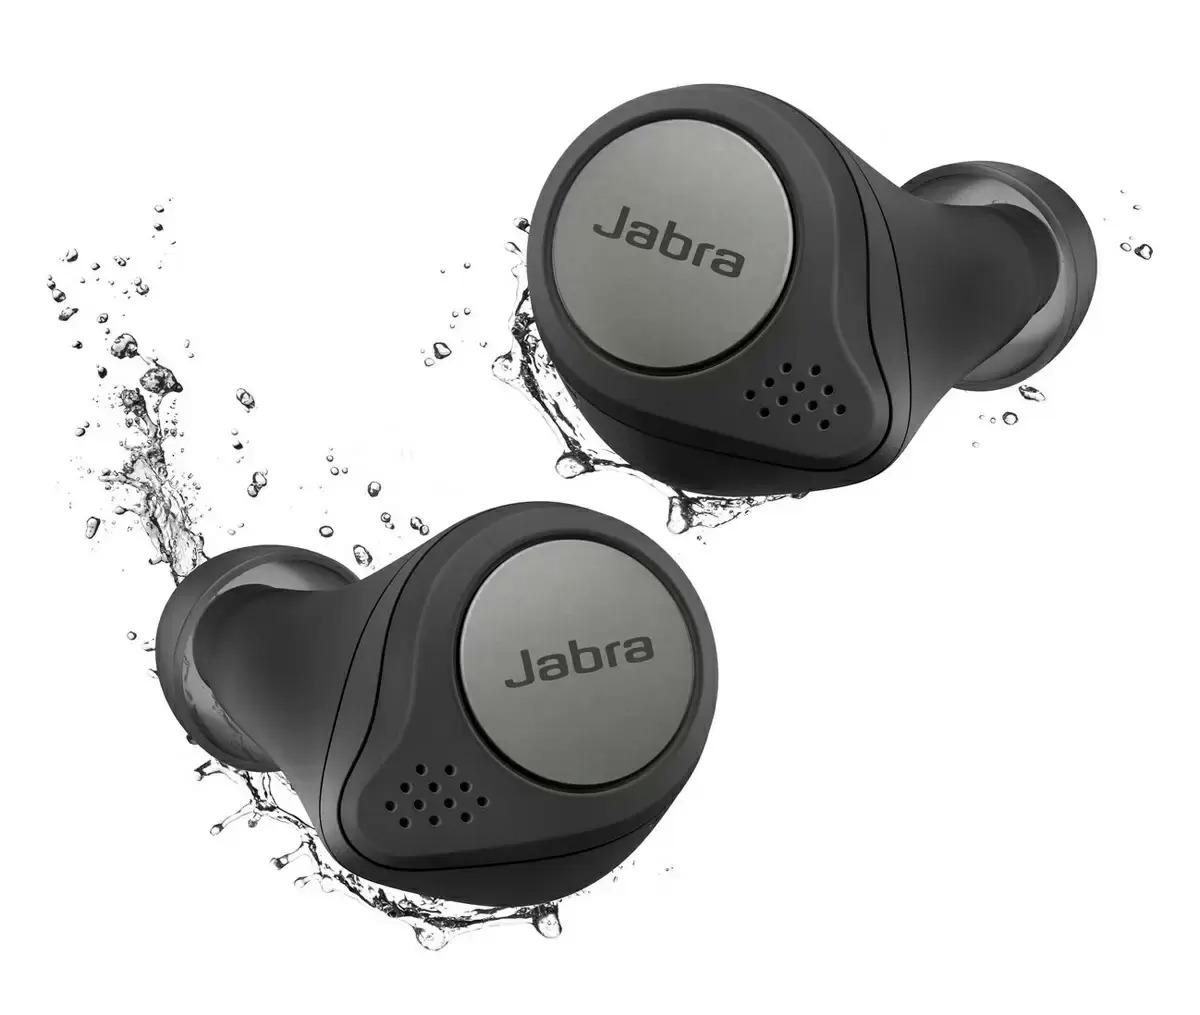 Jabra Elite Active 75t True Wireless Earbuds for $79.99 Shipped